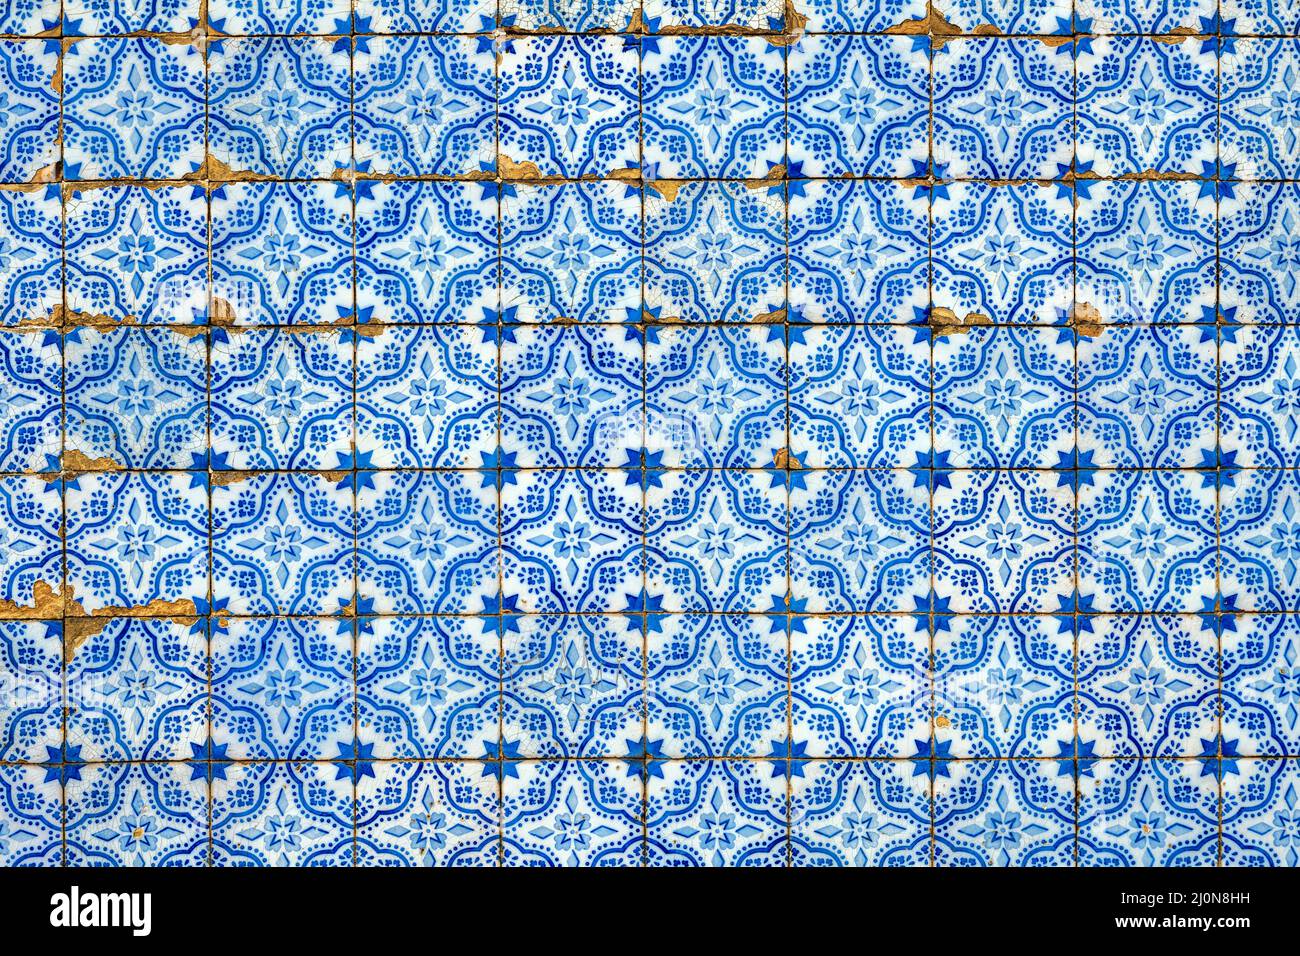 Background from typical blue portuguese tiles Stock Photo